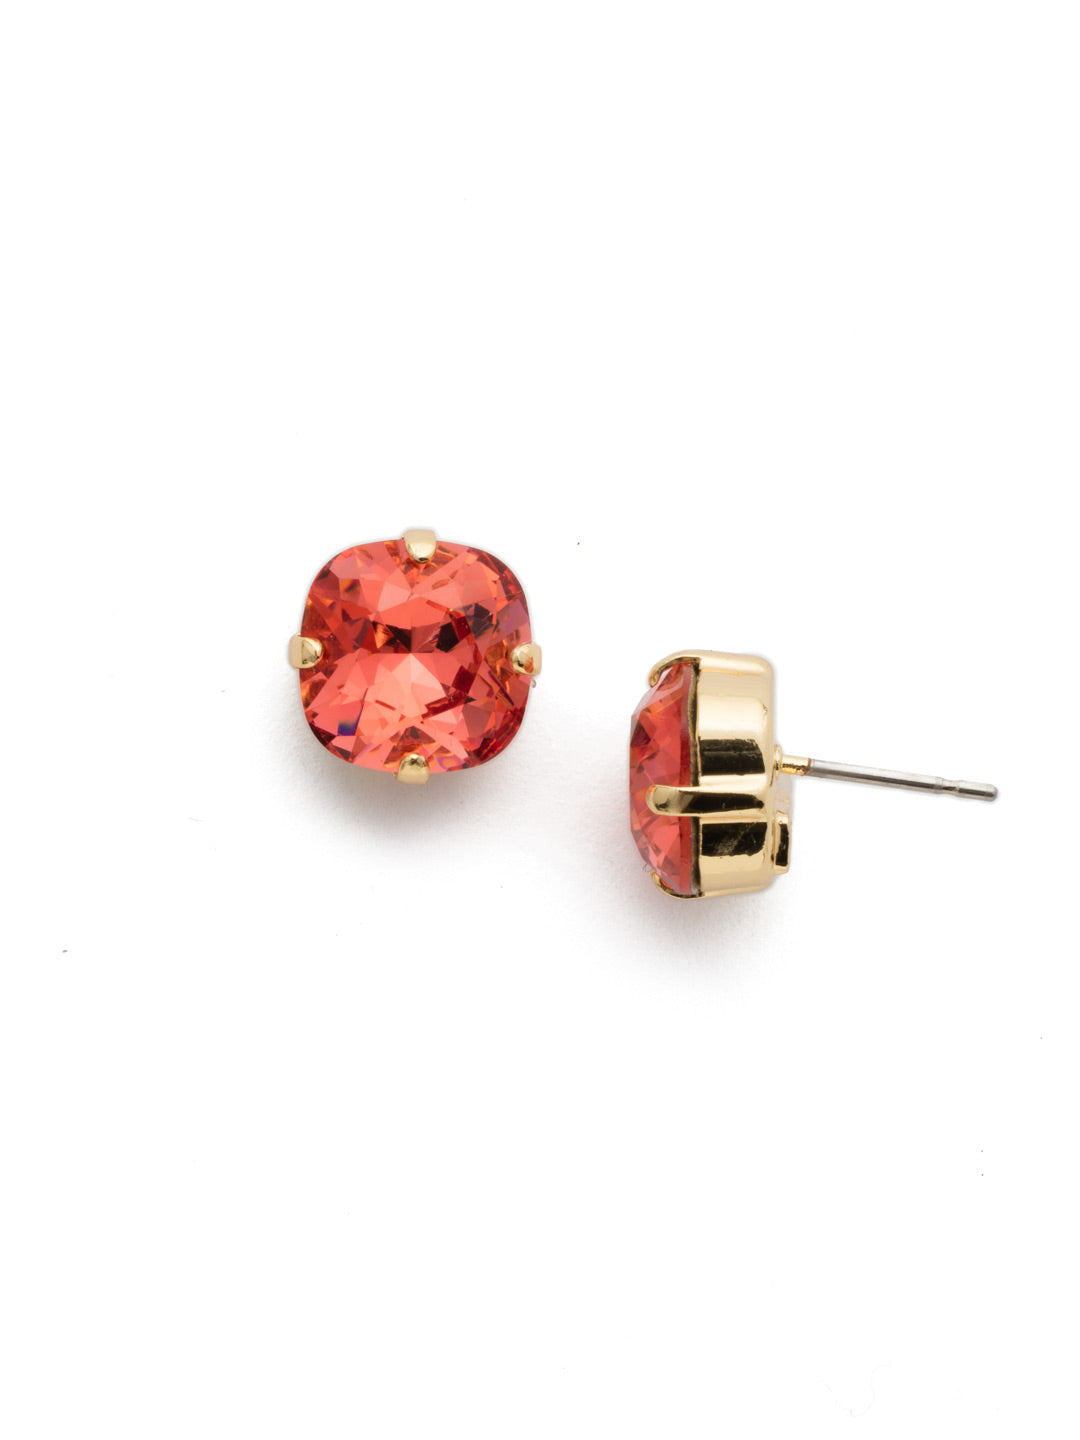 Halcyon Stud Earrings - EDH25BGCRL - A beautiful, luminous cushion-cut crystal in a classic four-pronged setting that's ideal for everyday wear. From Sorrelli's Coral collection in our Bright Gold-tone finish.